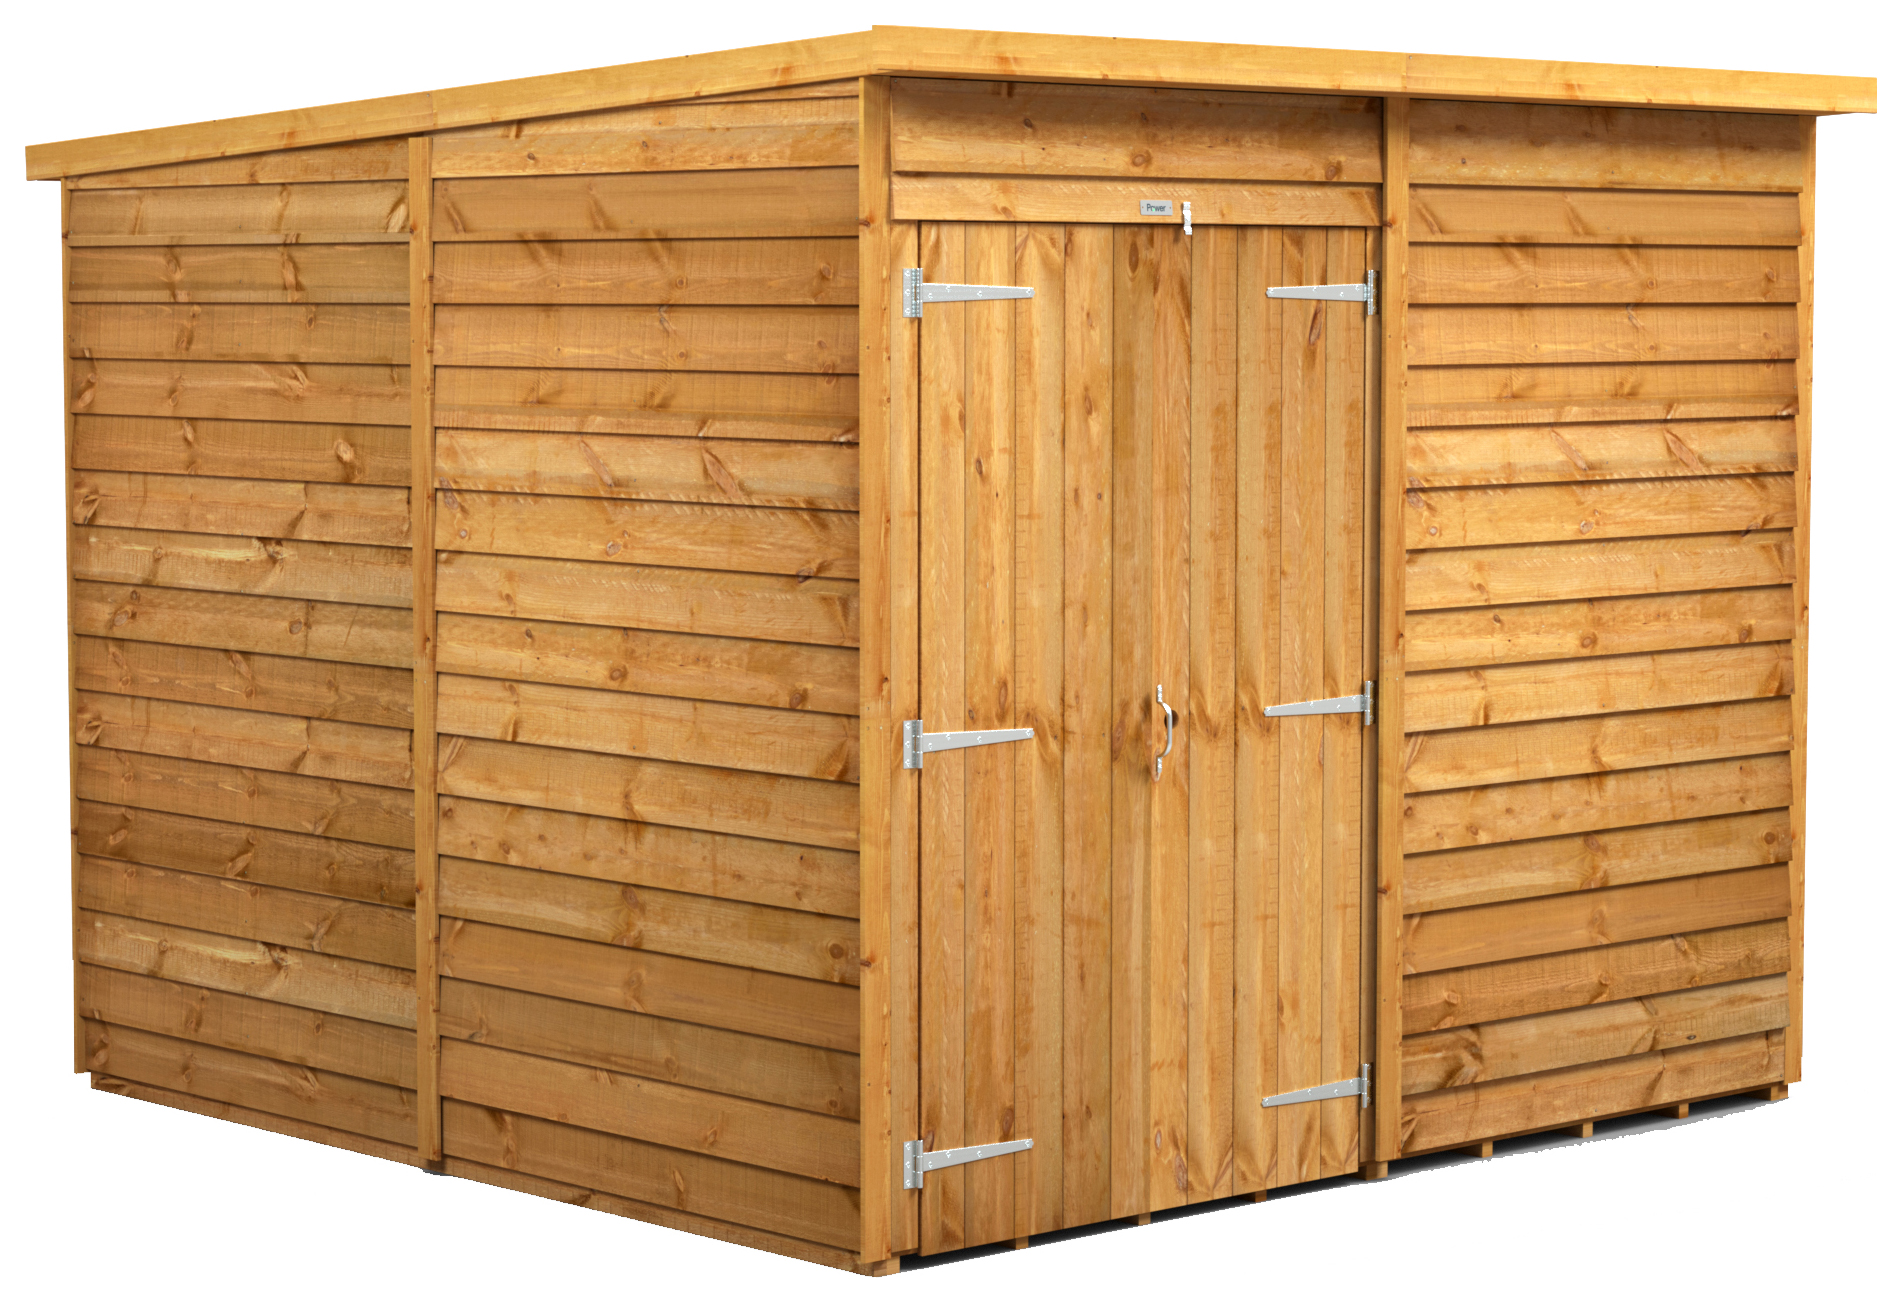 Power Sheds Double Door Pent Overlap Dip Treated Windowless Shed - 8 x 8ft